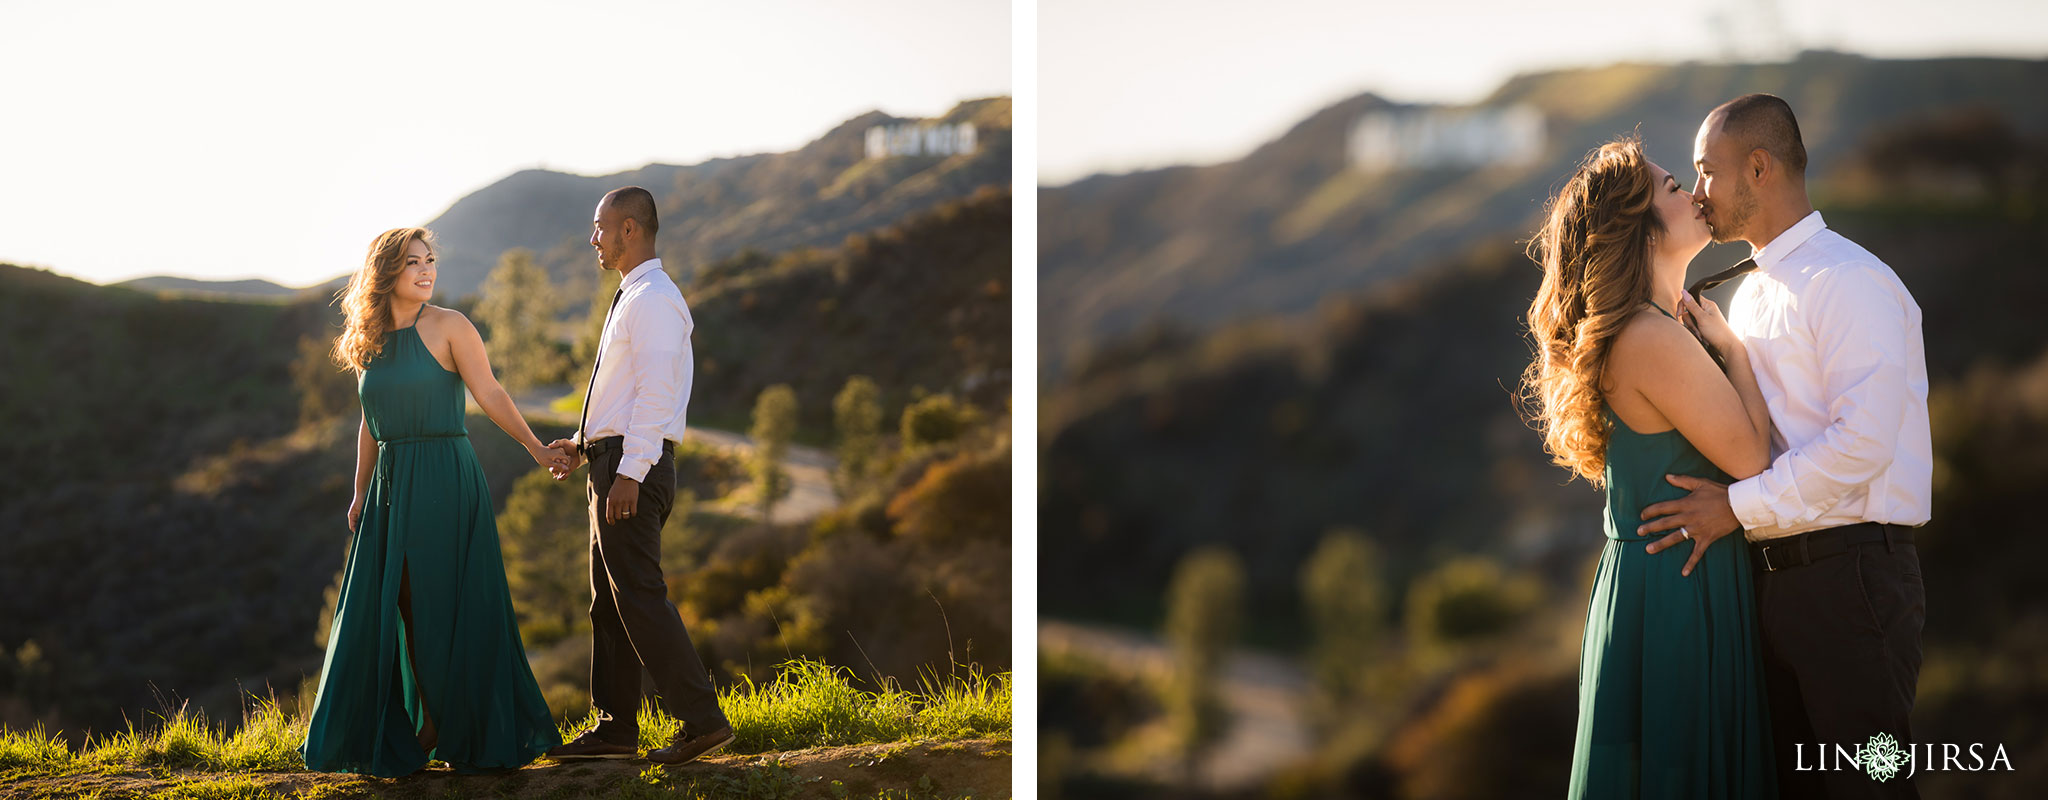 06 griffith park los angeles engagement photography